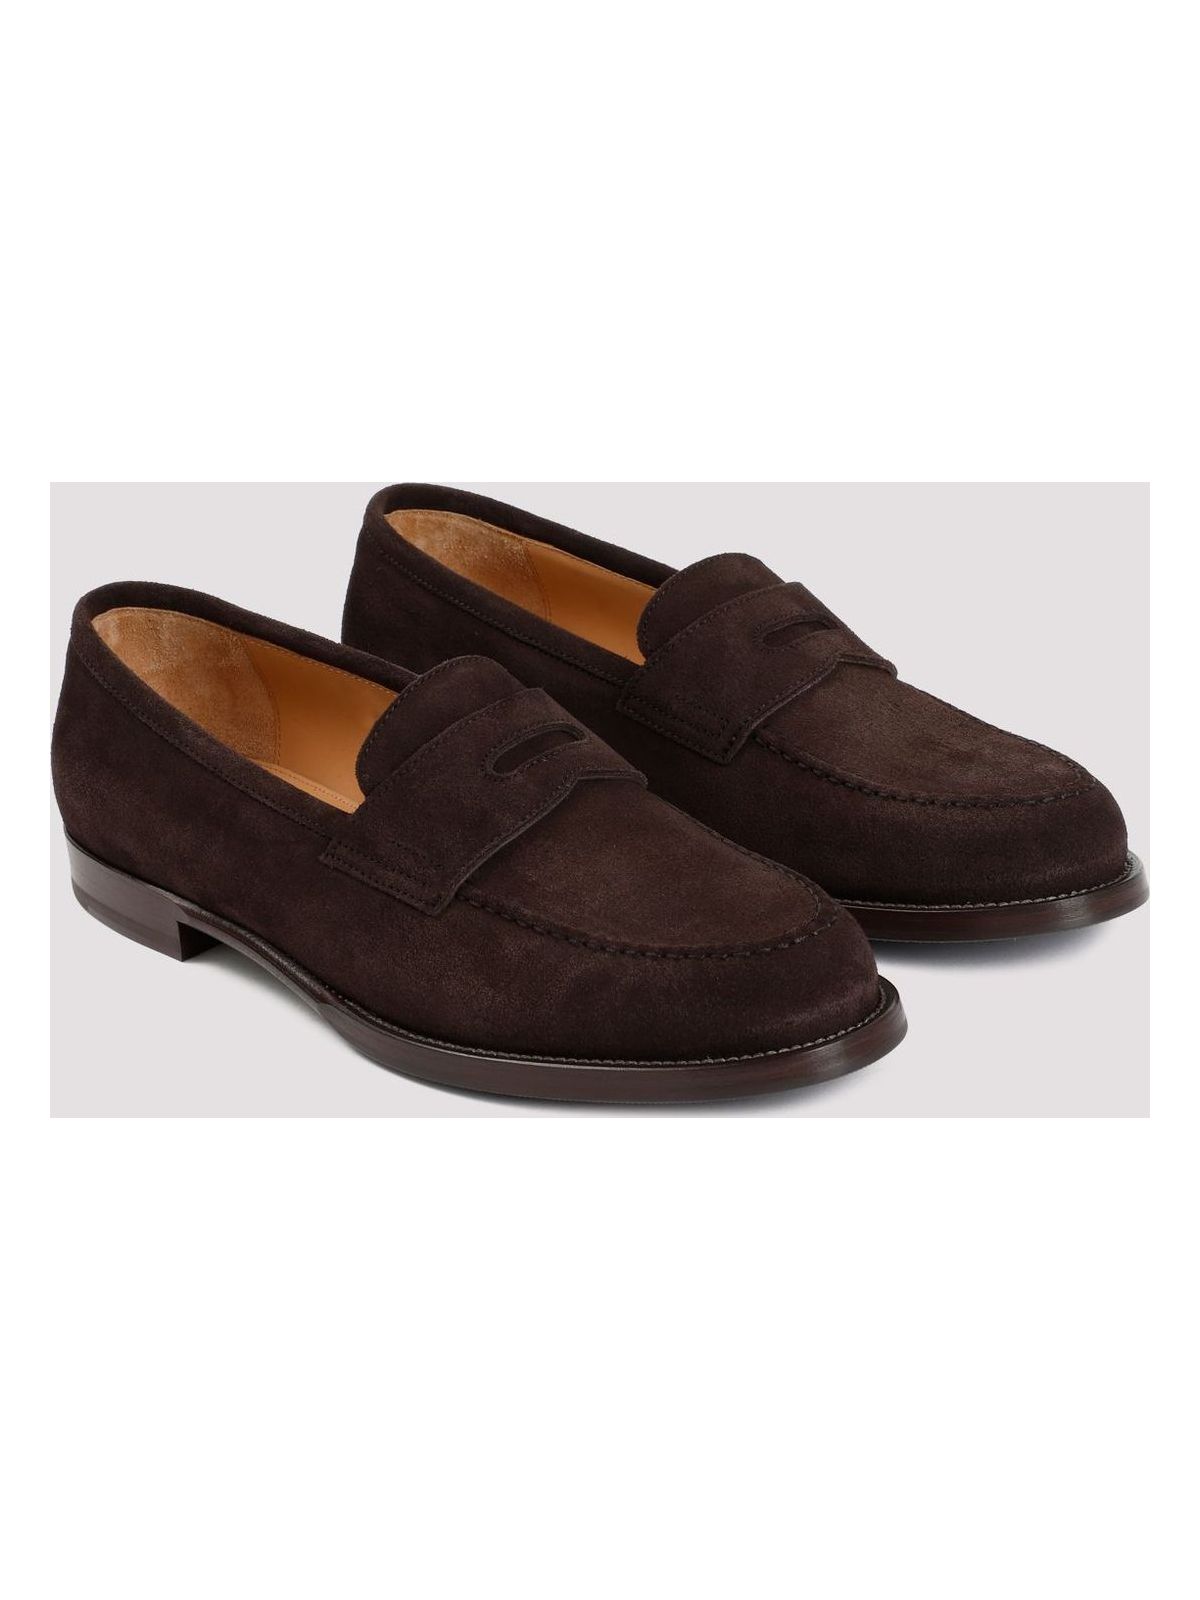 202 DUNHILL AUDLEY PENNY LEATHER LOAFERS